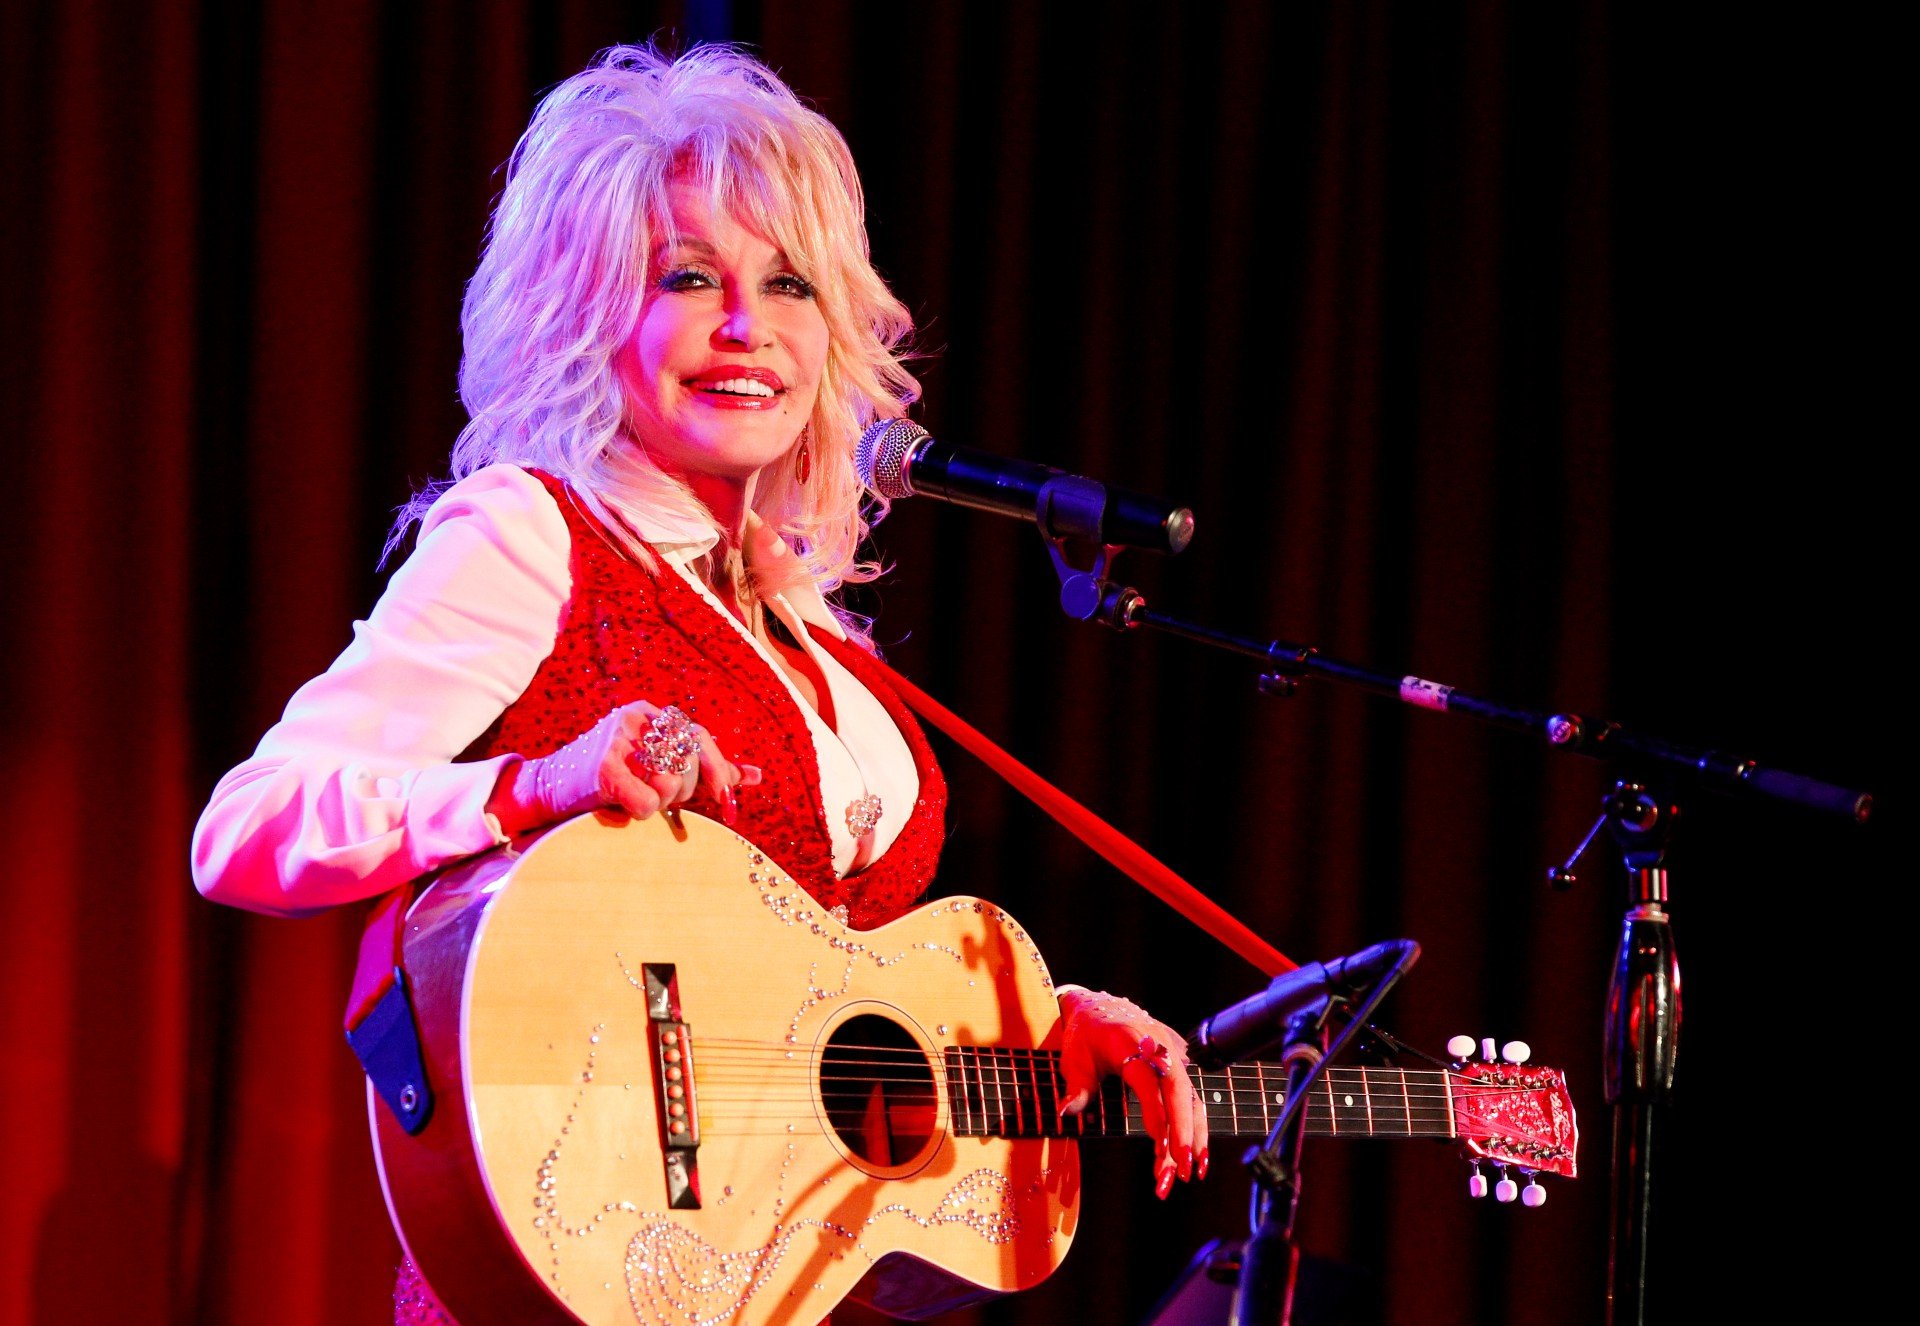 Dolly Parton smiles while holding her guitar